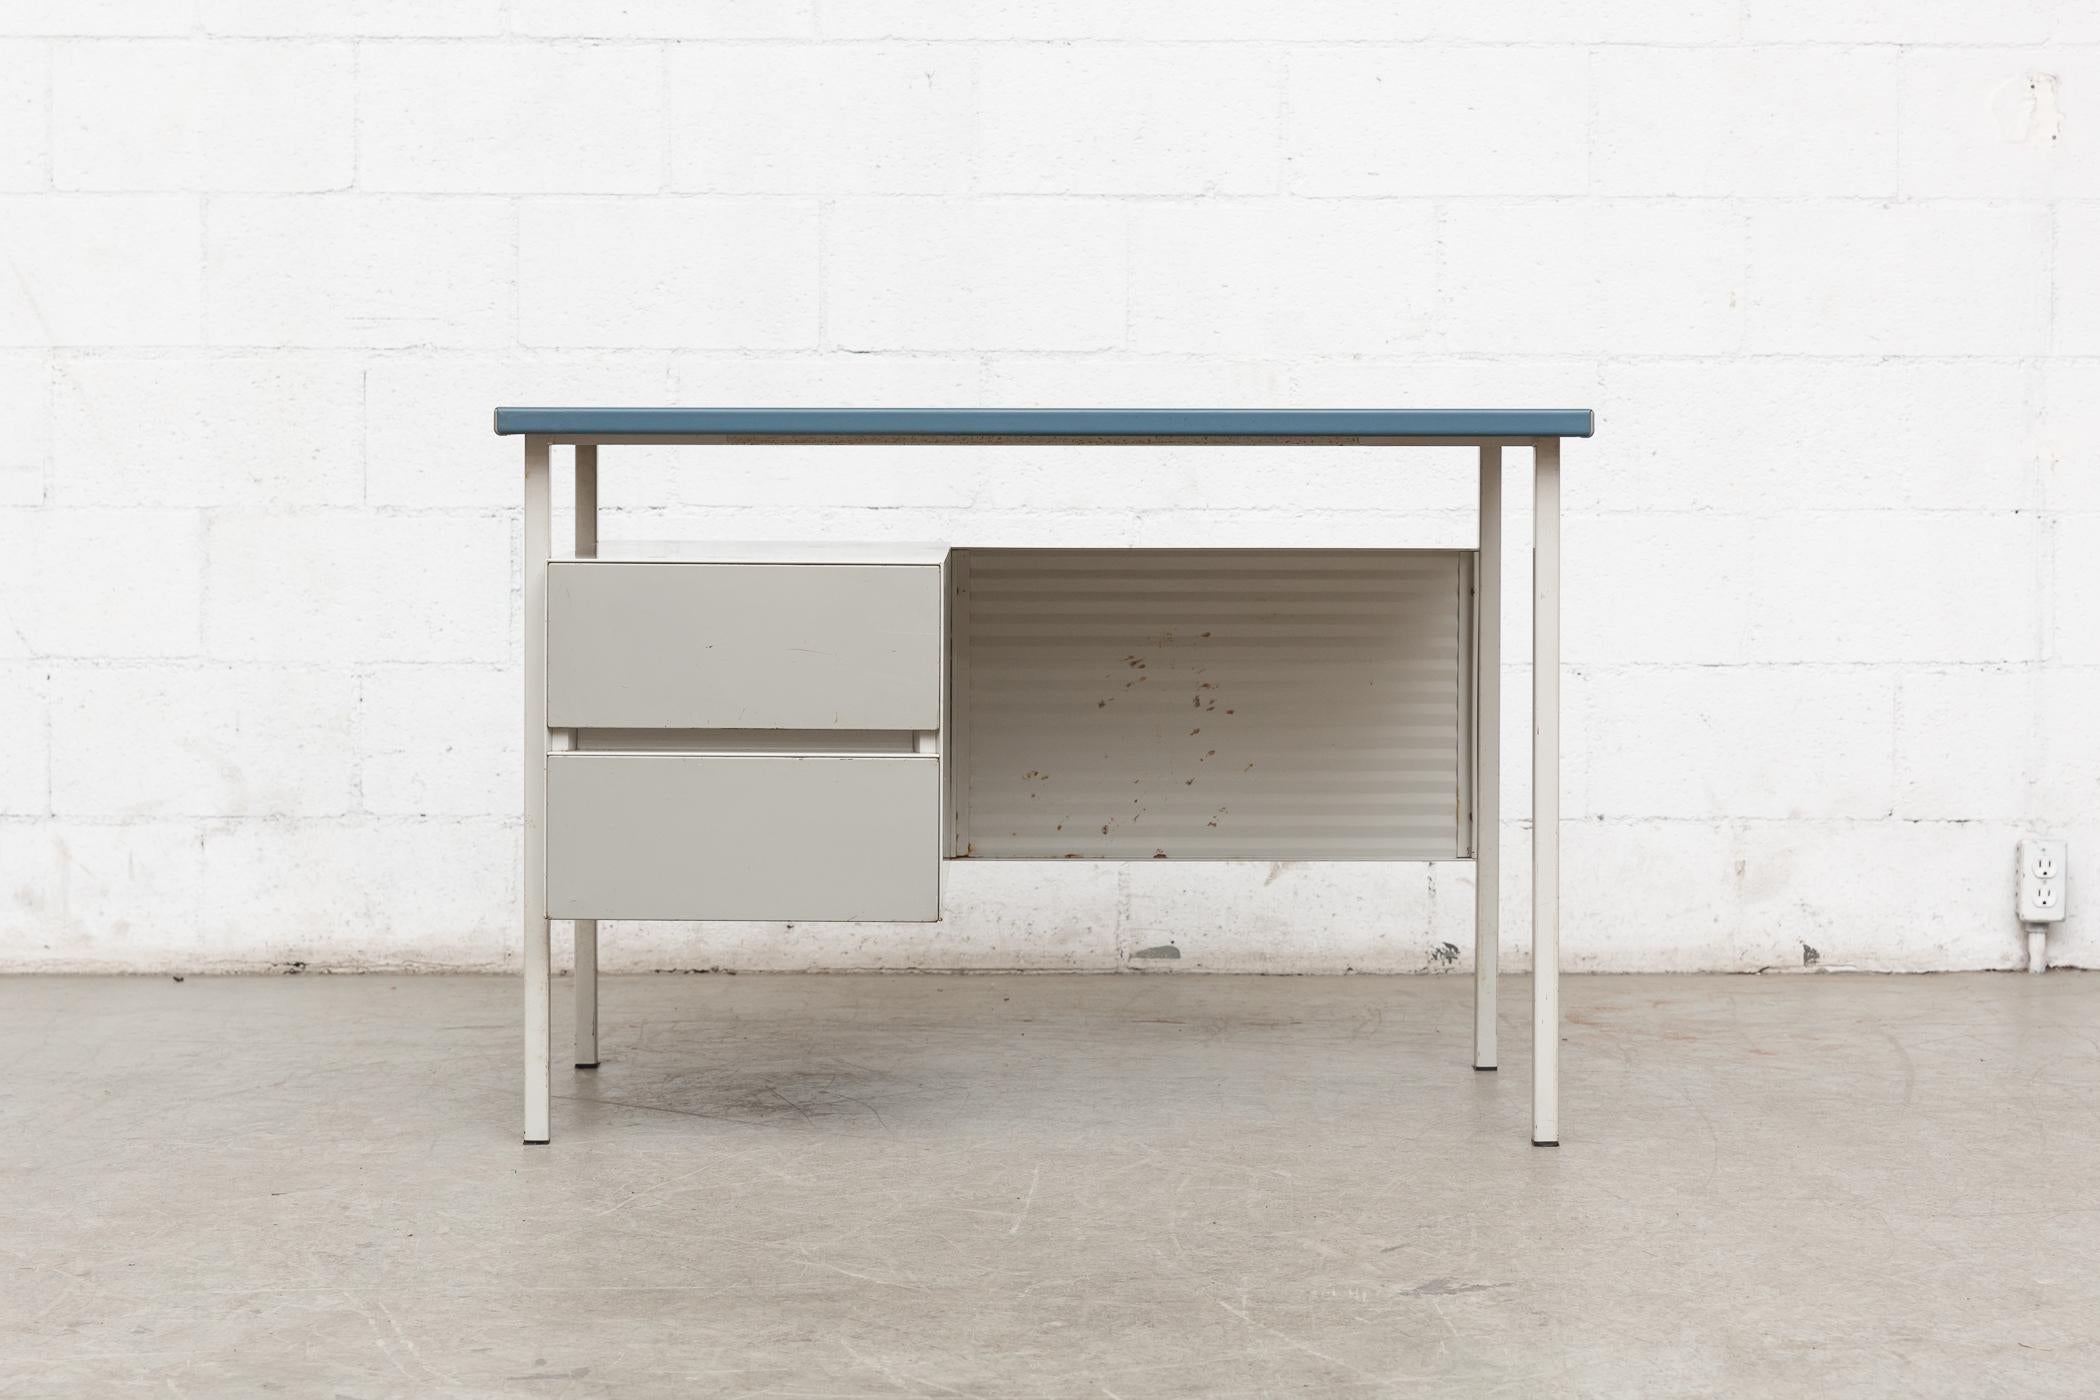 Gispen model 3803 by A.R. Cordemeyer. Cute little light grey enameled metal desk with matching enameled corrugated privacy screen and blue vinyl wrapped top and grey enameled drawer faces. Original condition with some wear and surface rust to metal